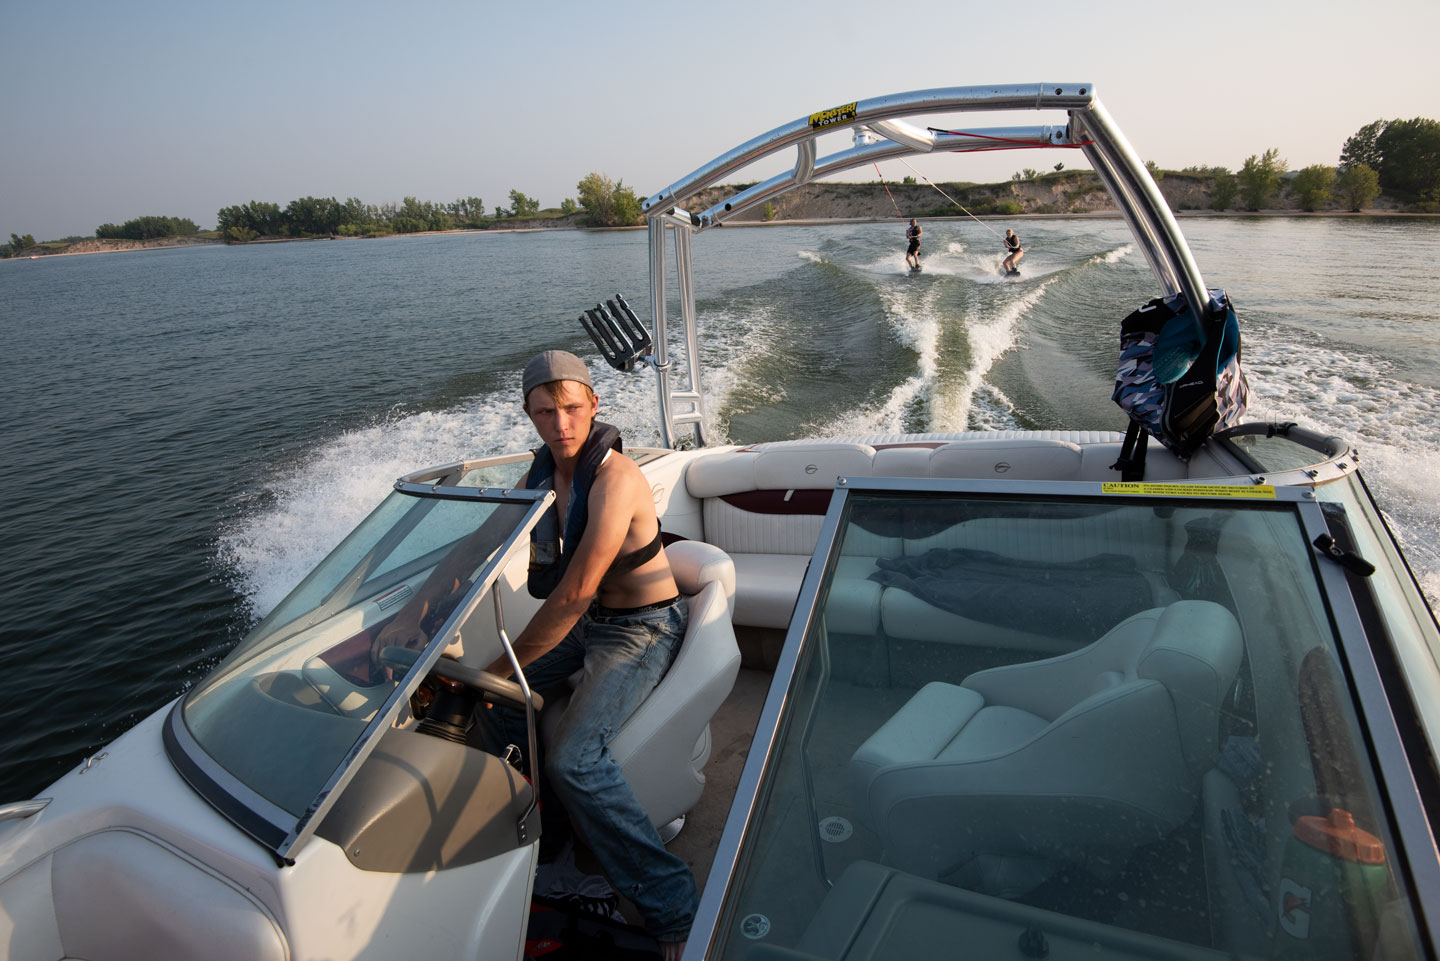 A young man drives a speed boat, pulling teens on wakeboards